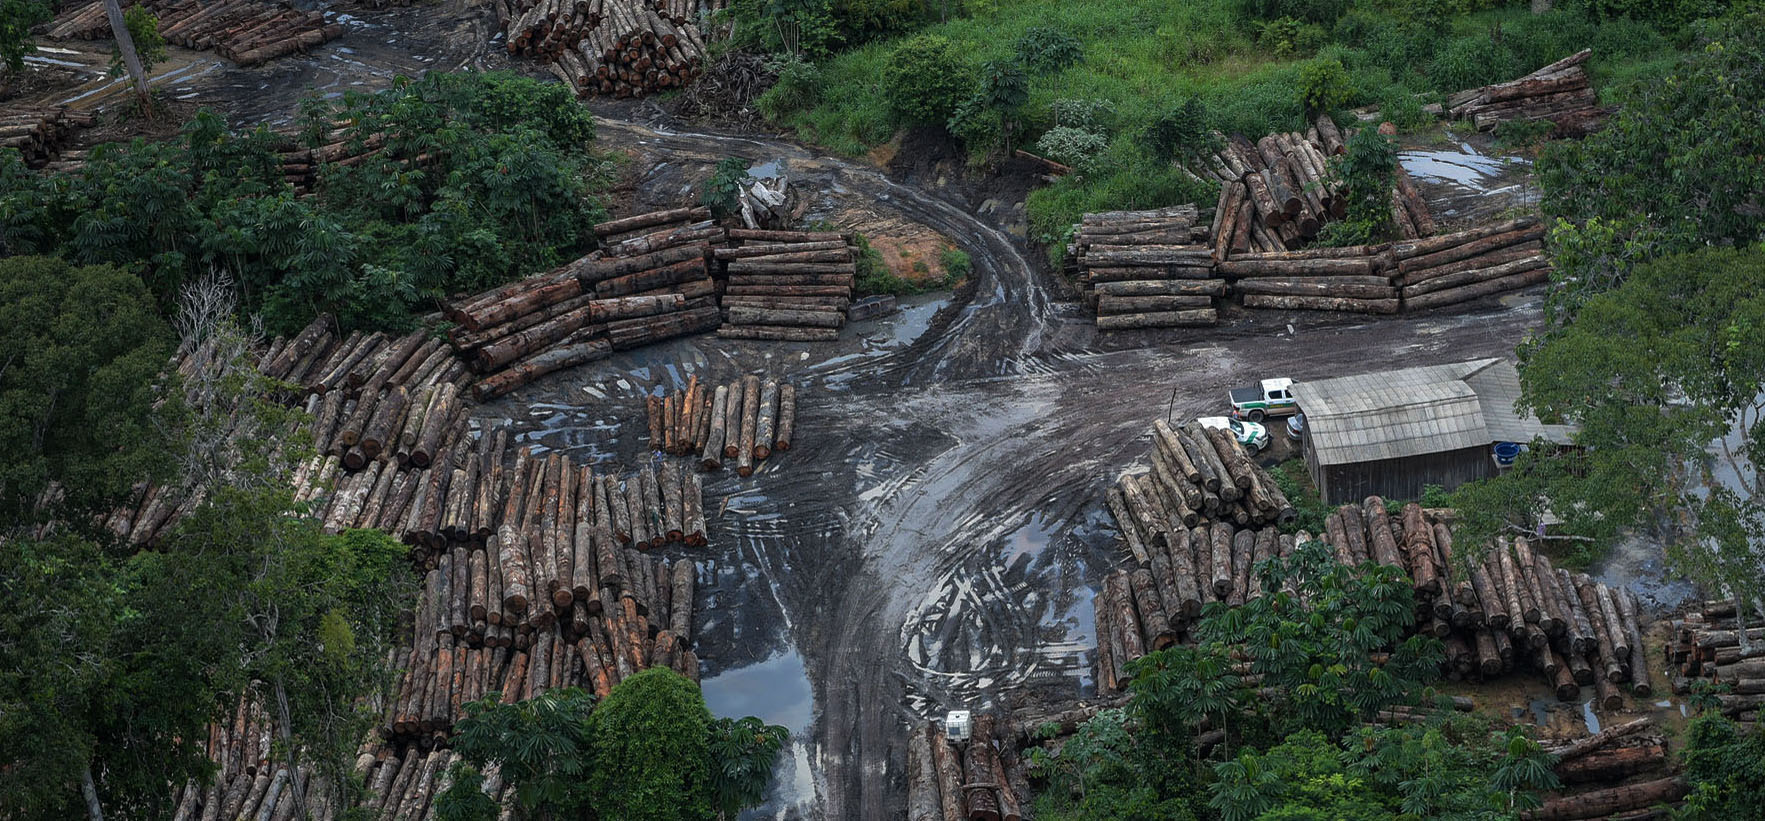 An ariel shot of an illegal logging site in the Amazon, with hundreds of felled trees stacked up.